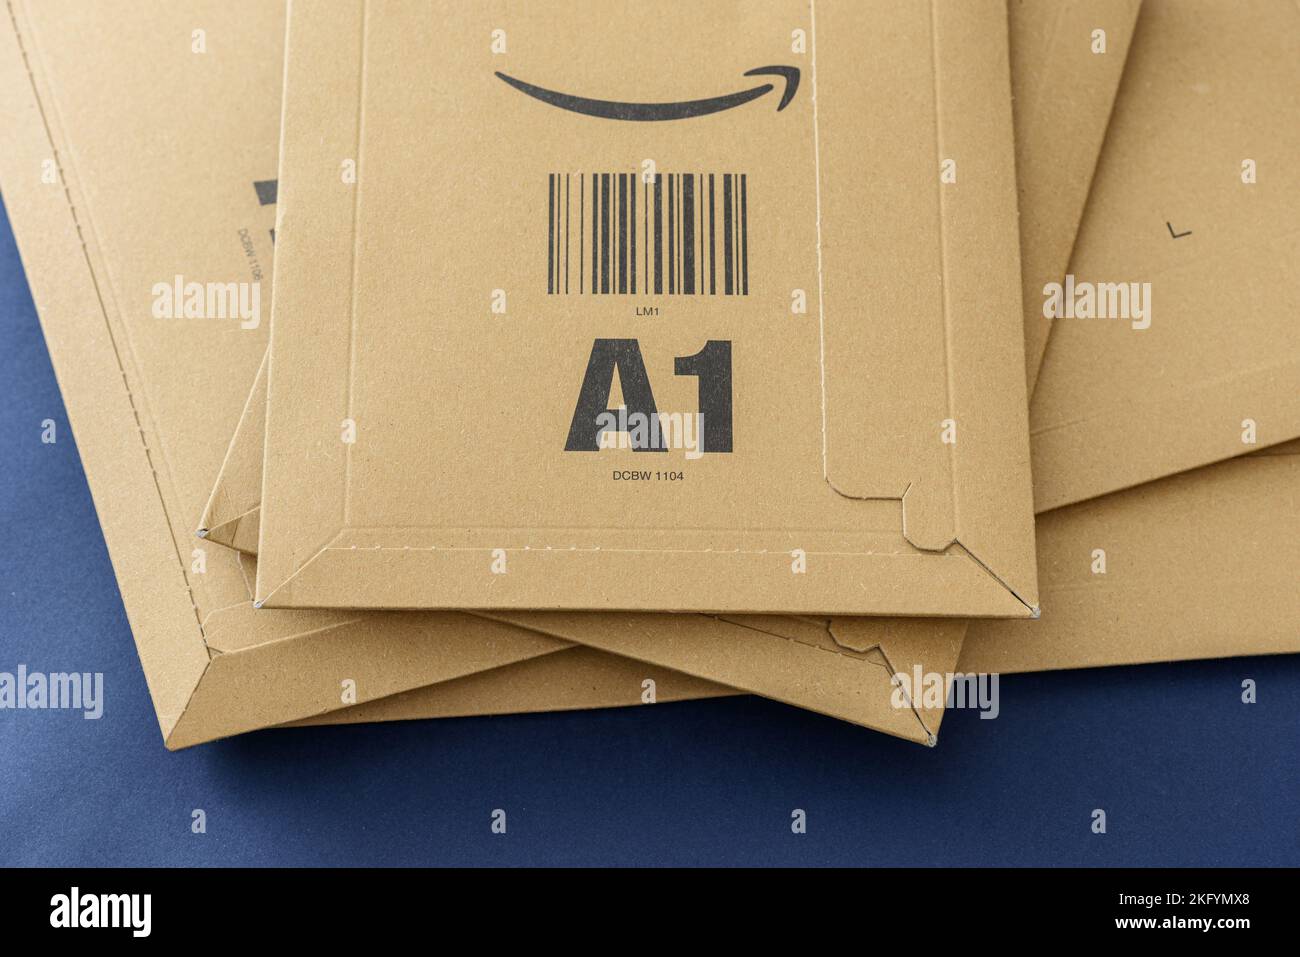 ISTANBUL, TURKEY - NOVEMBER 20, 2022: Amazon logo with sign arrow smiling printed on delivery envelope brown cardboard. Stock Photo